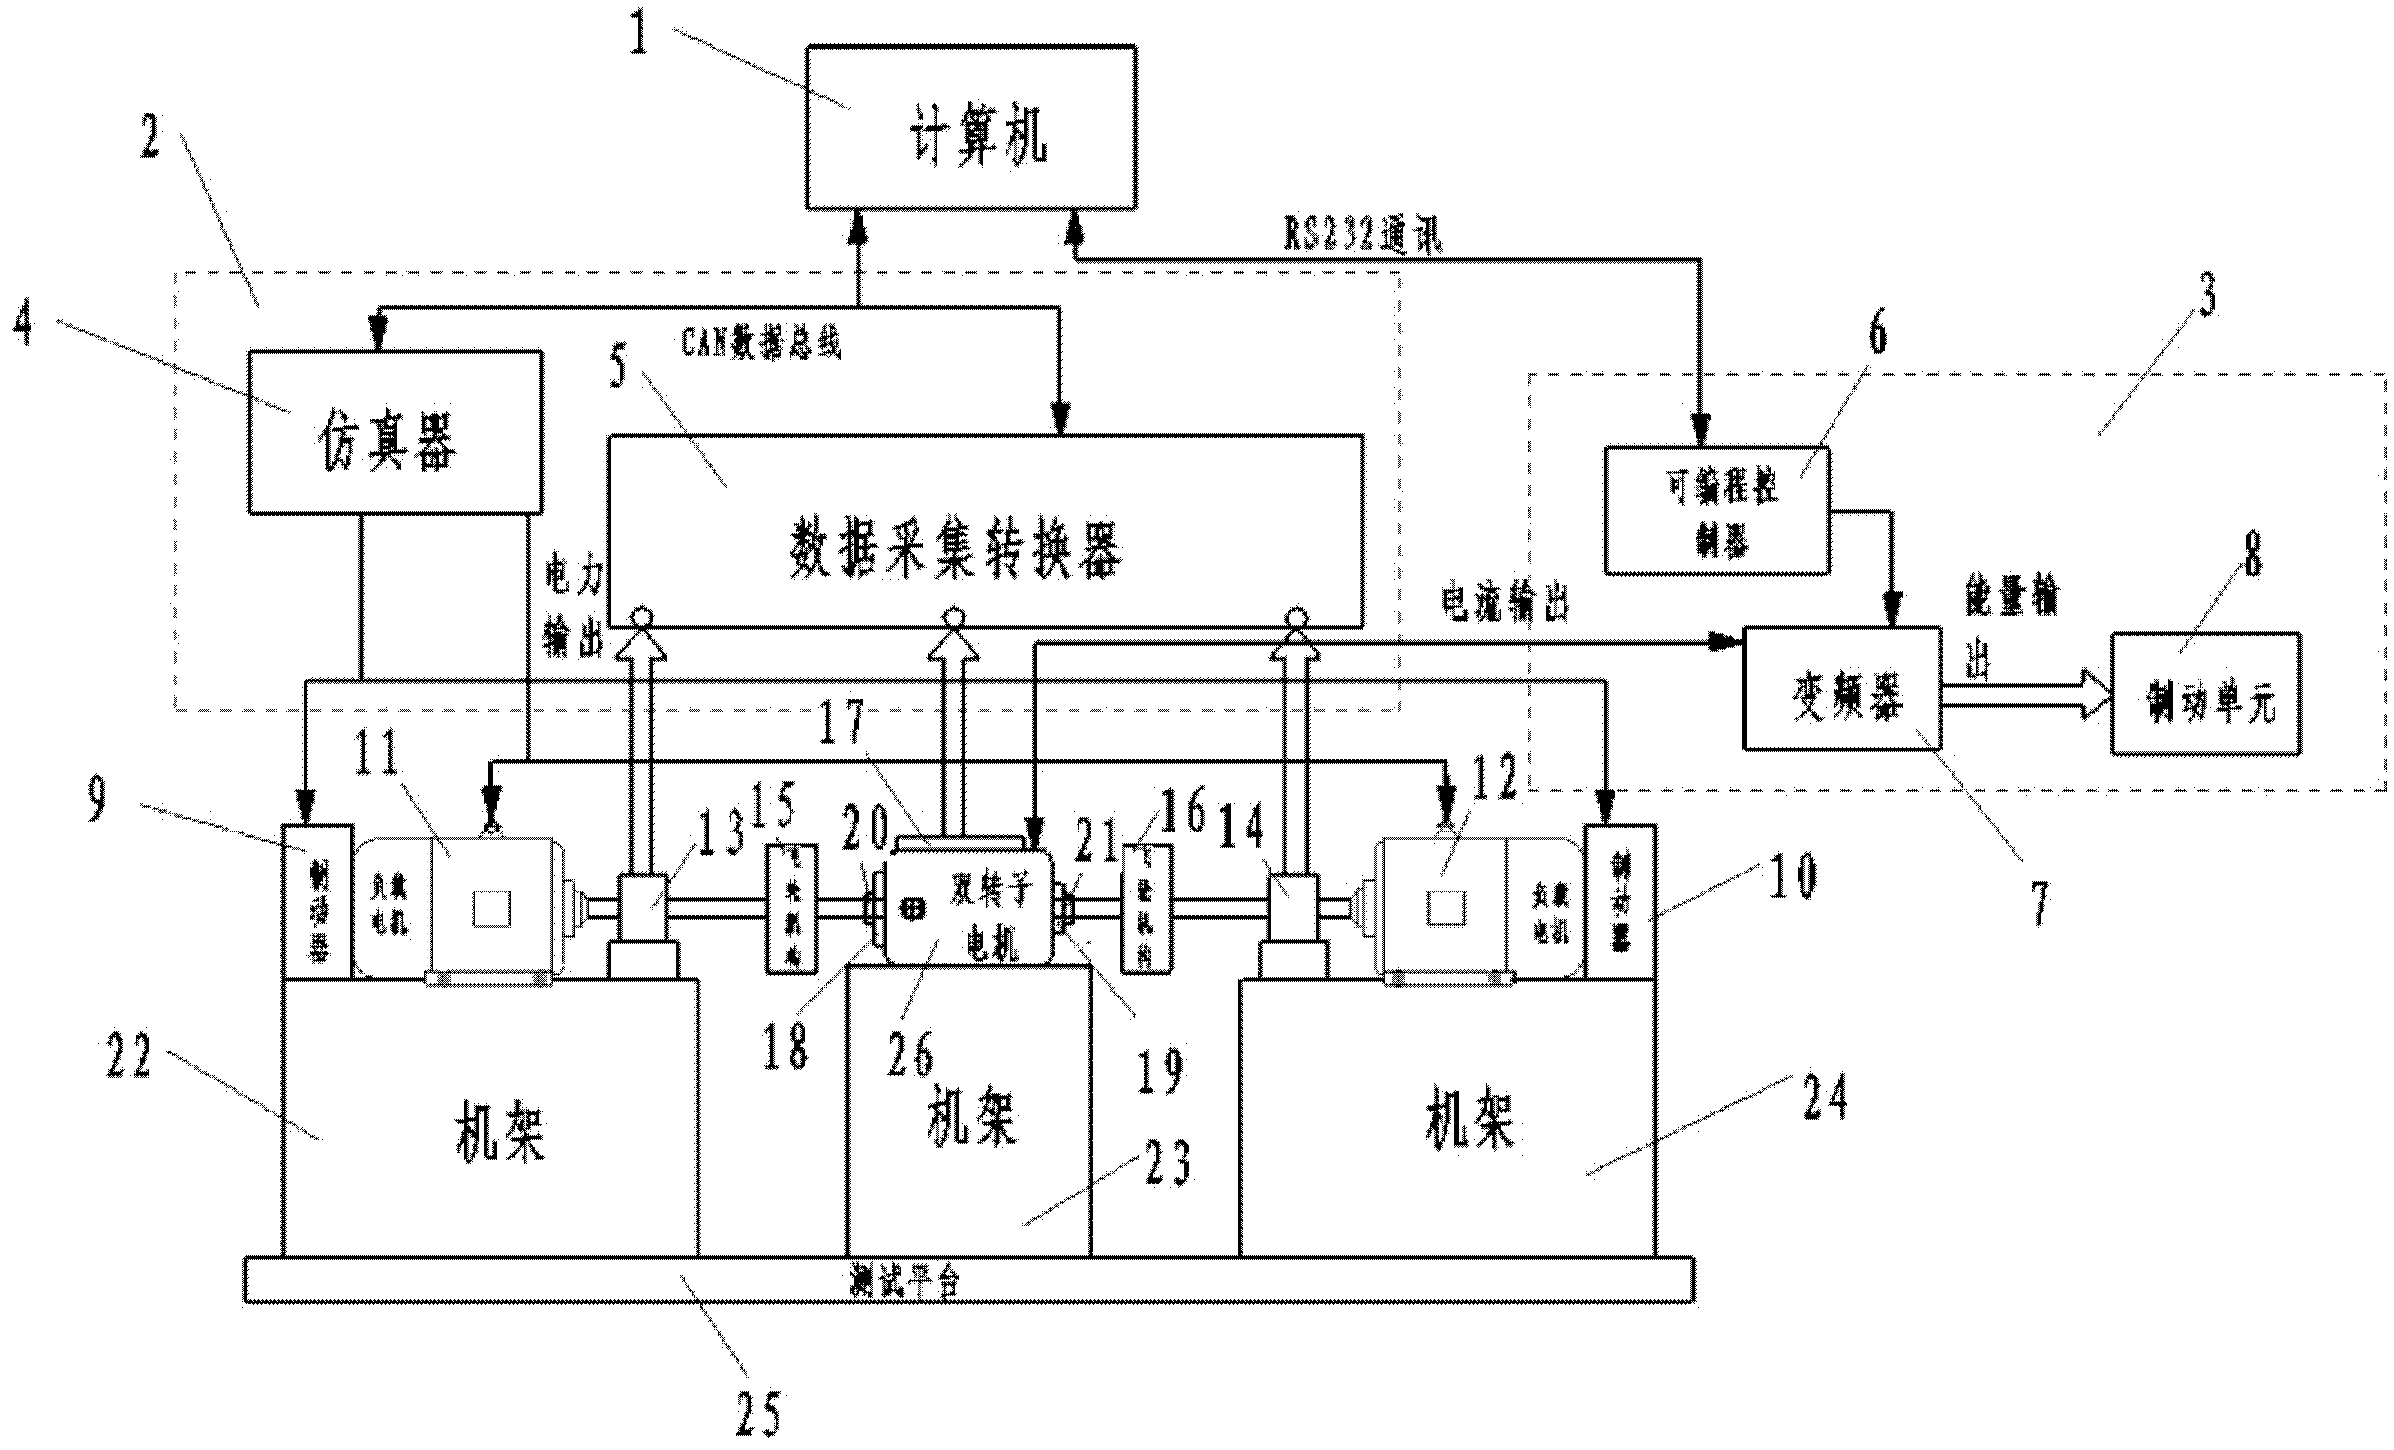 Method and system for testing novel contra-rotating dual-rotor motor driver